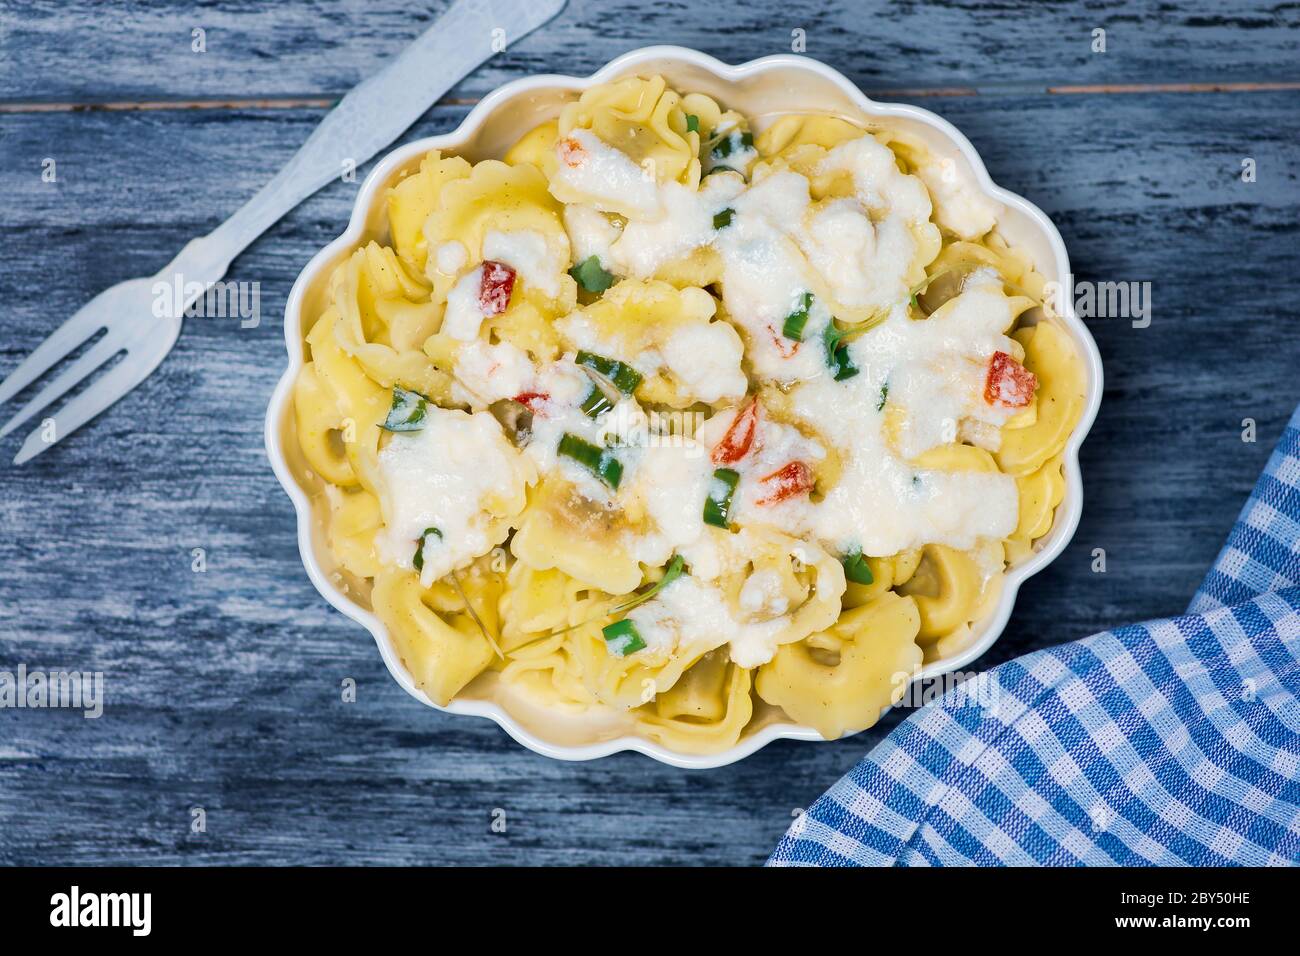 Tortellini Italian stuffed pasta on a plate with cheese and vegetables Stock Photo